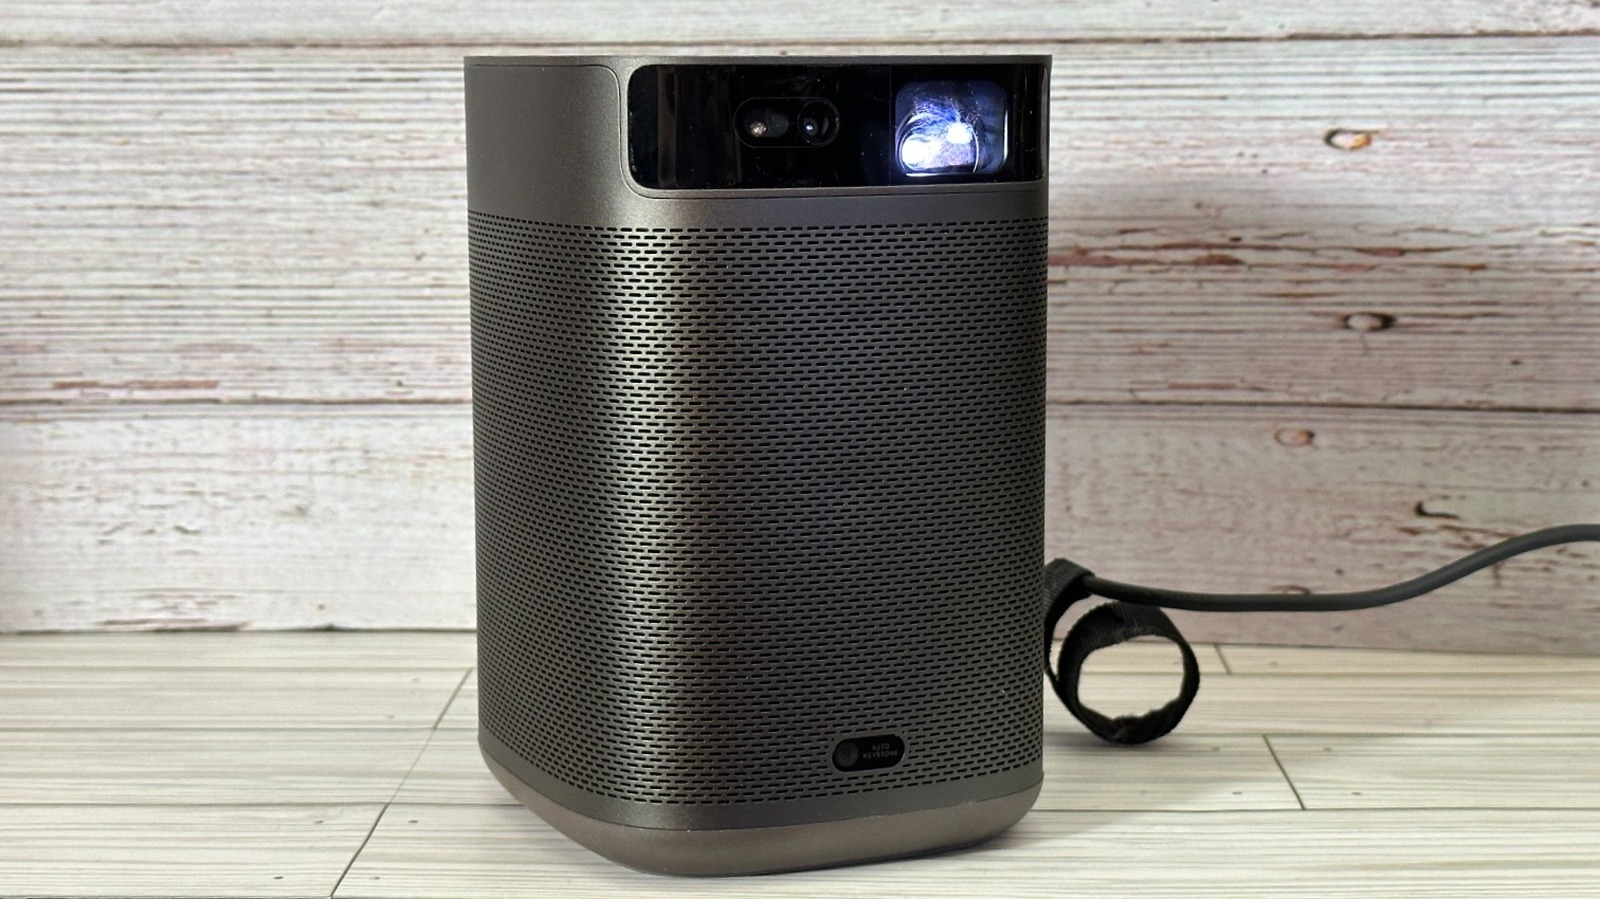 Xgimi Mogo 2 Pro Review: A Smaller, Lighter, And Cheaper Smart Projector